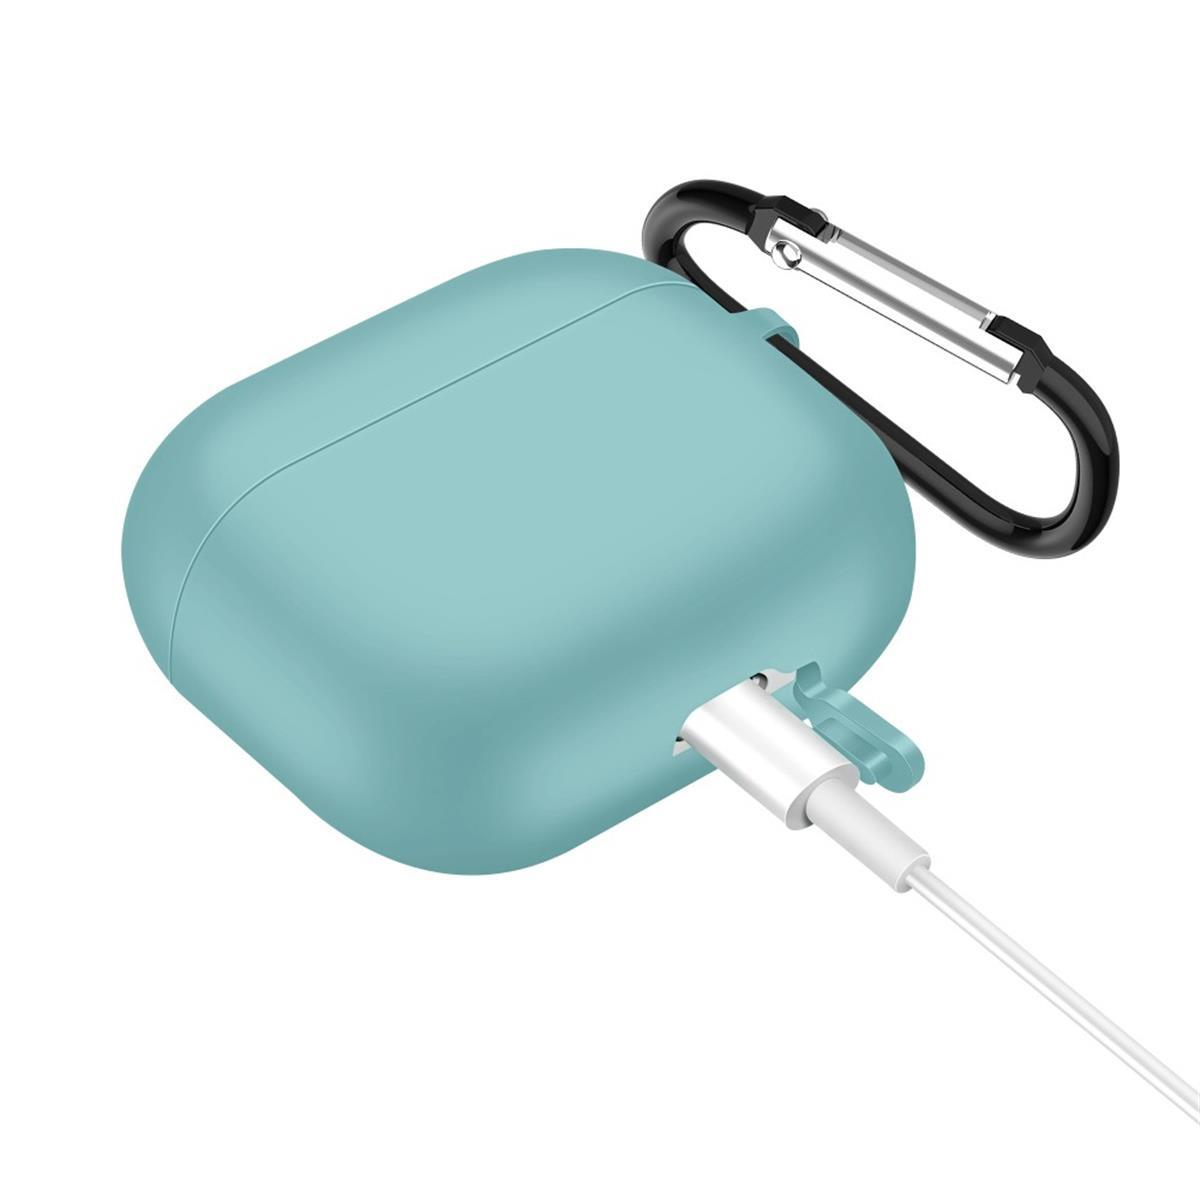 76810 Silikoncover für Ladecase Apple COVERKINGZ Grün, AirPods Unisex, 3